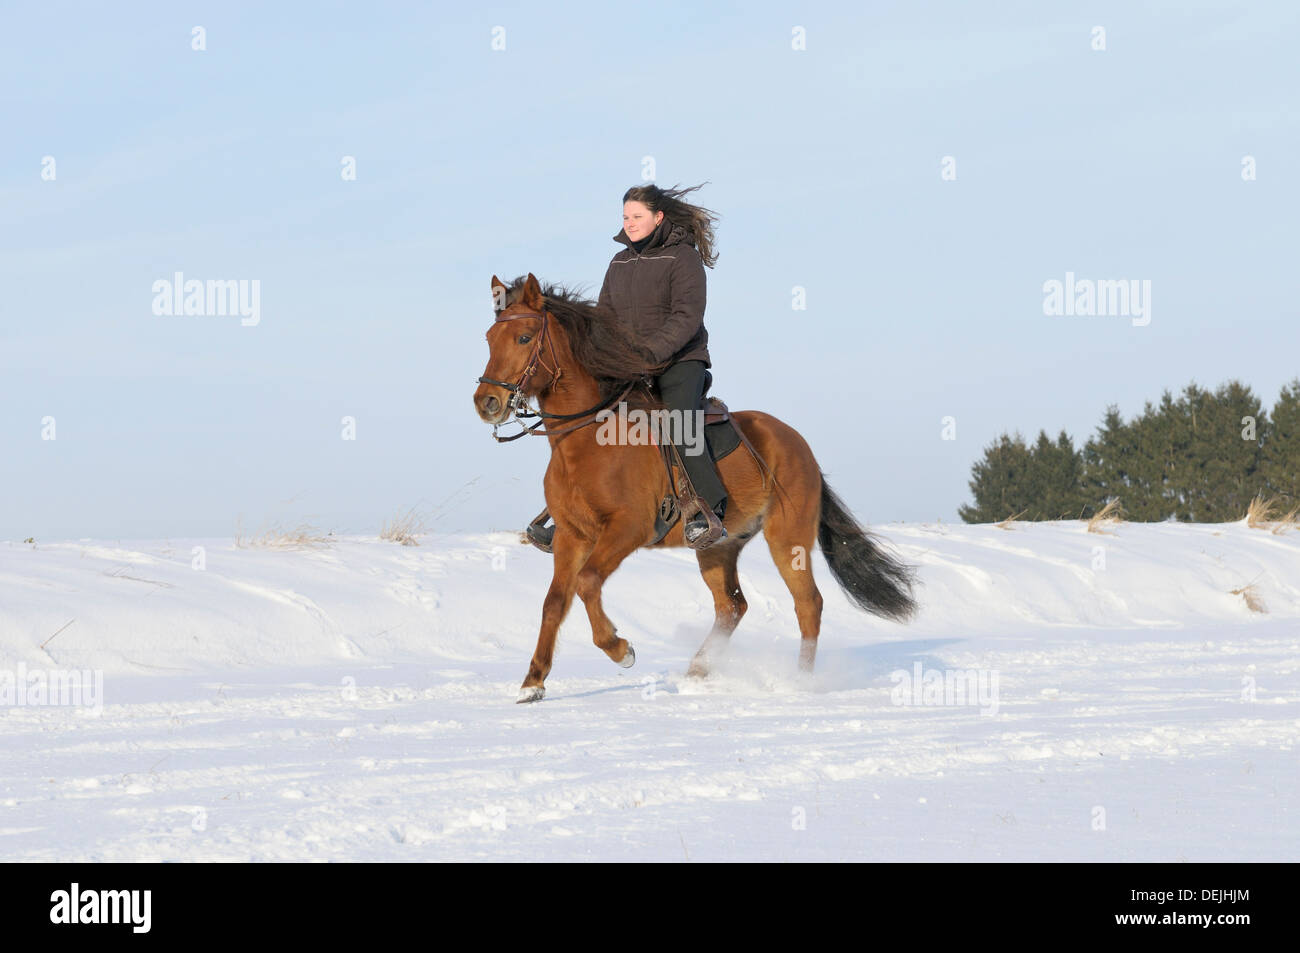 Young rider galloping on back of a Paso Fino horse in winter Stock Photo